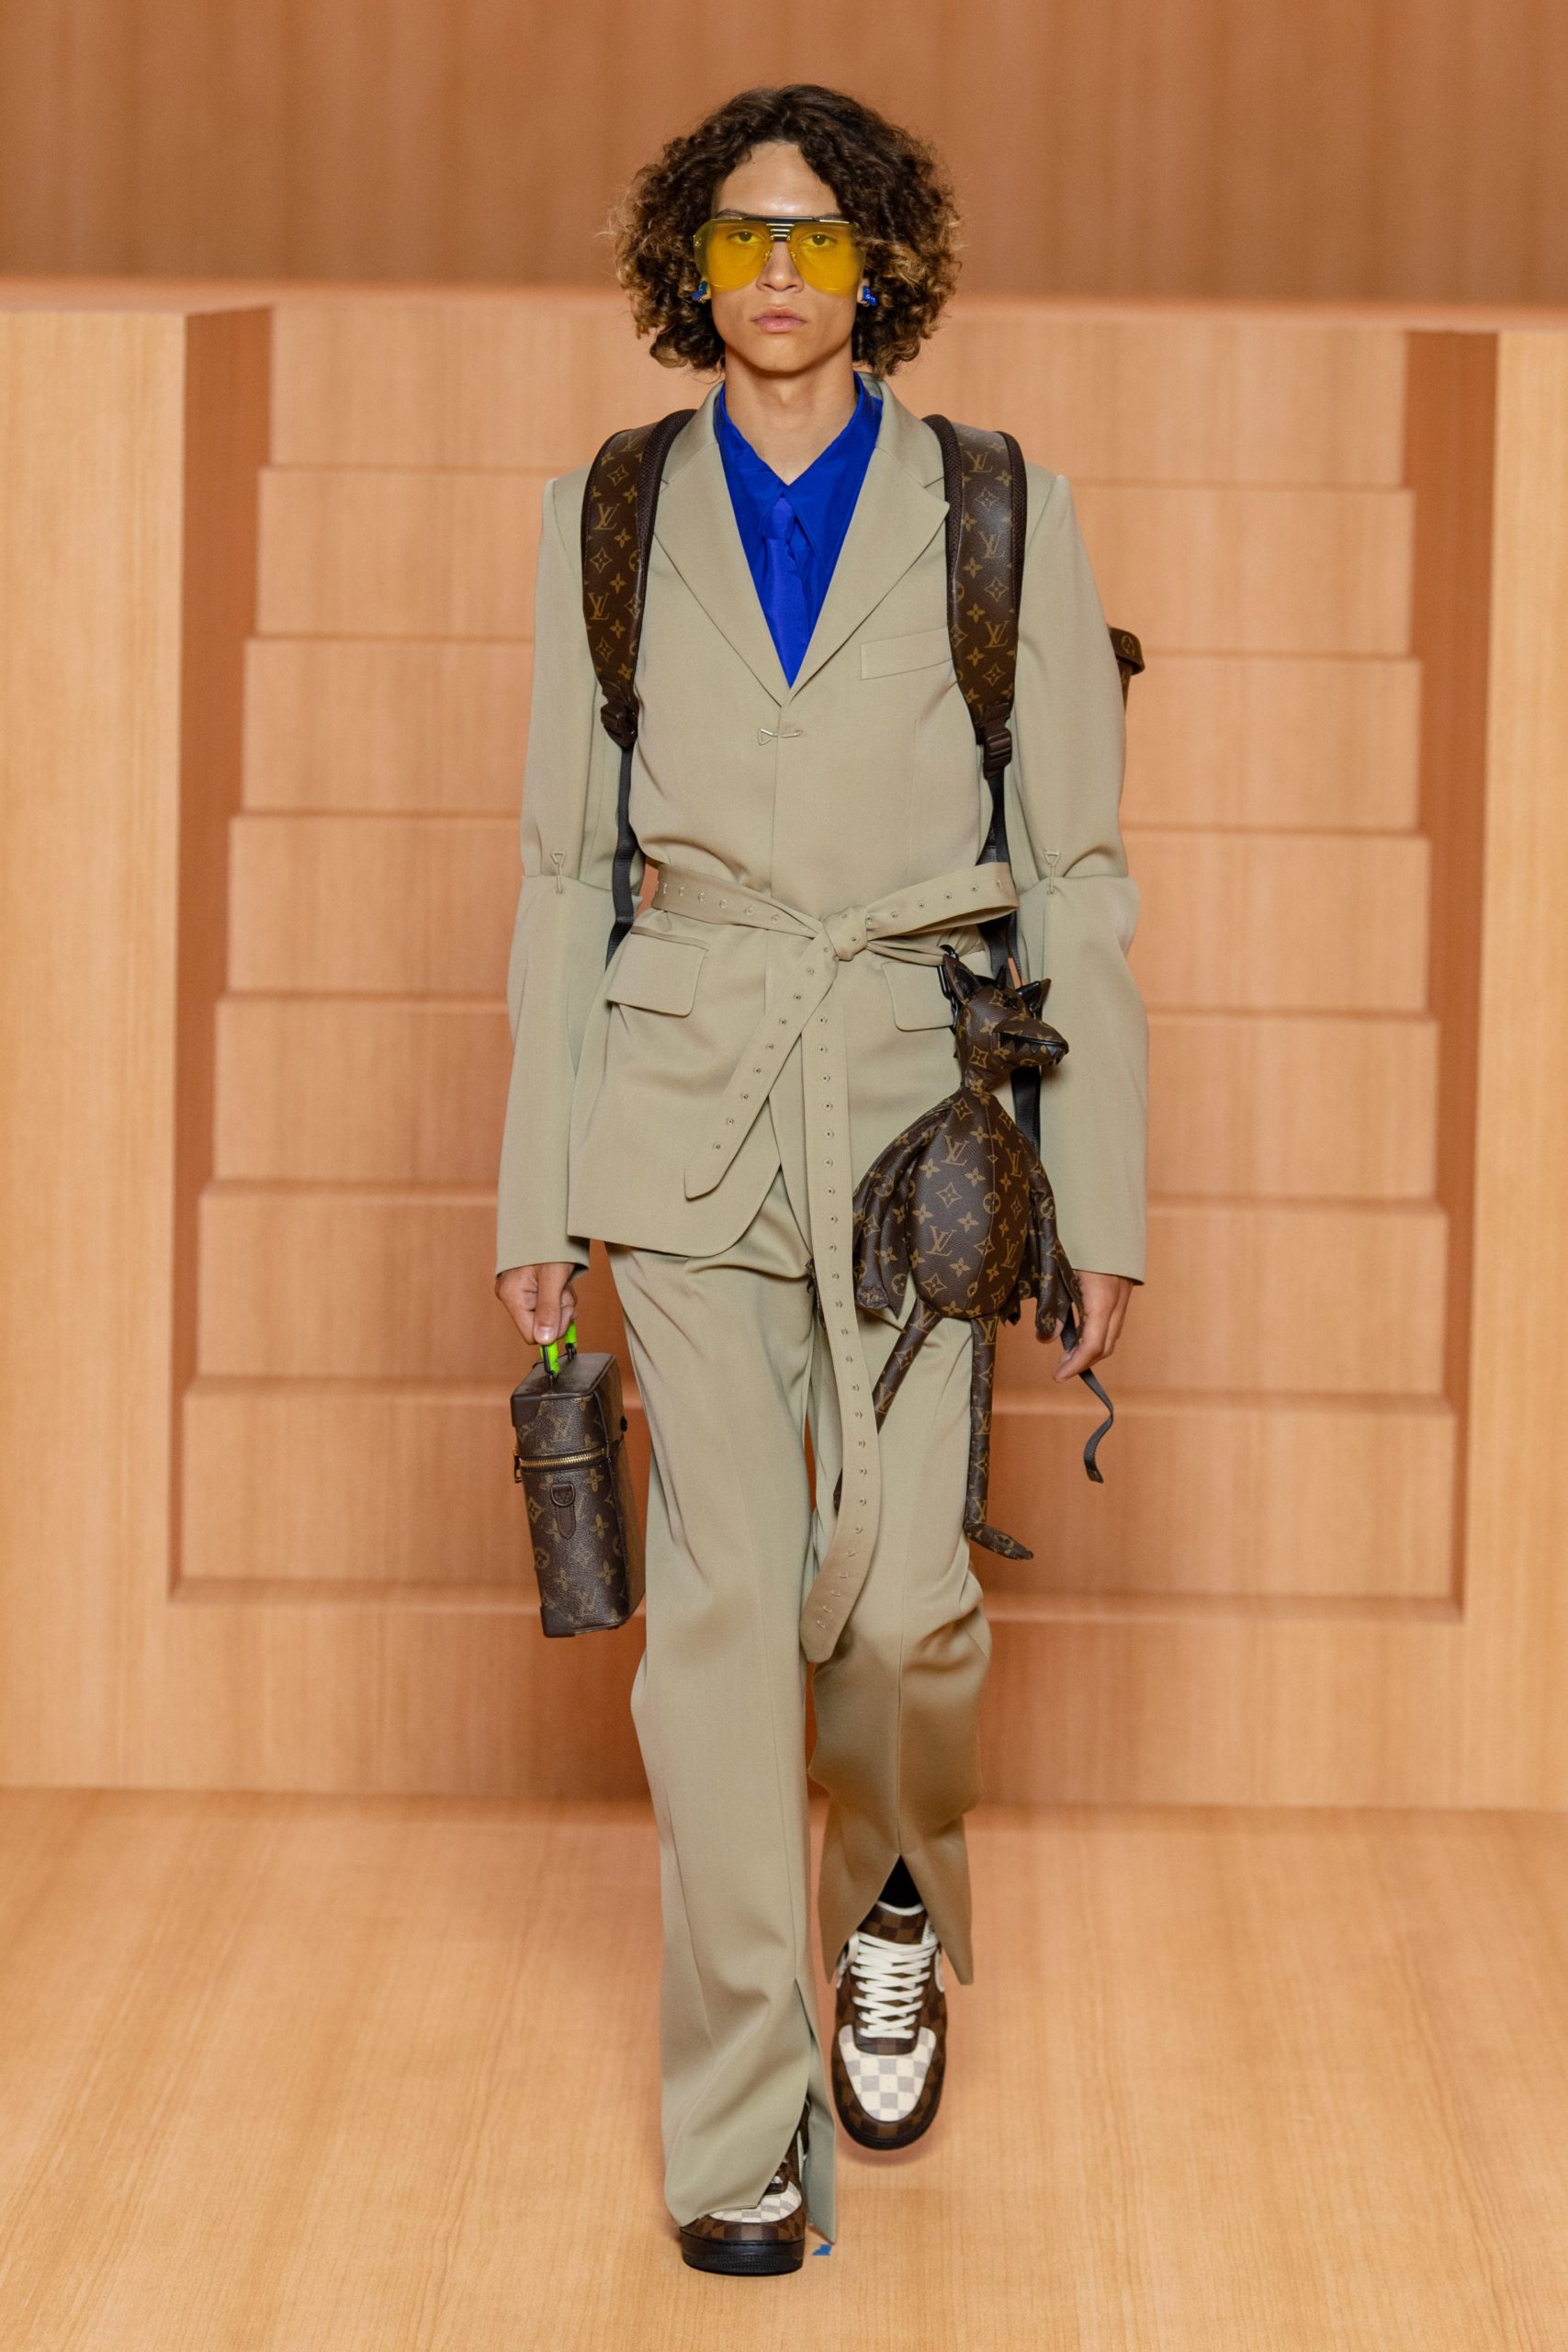 View the full Spring 2019 menswear collection from Louis Vuitton